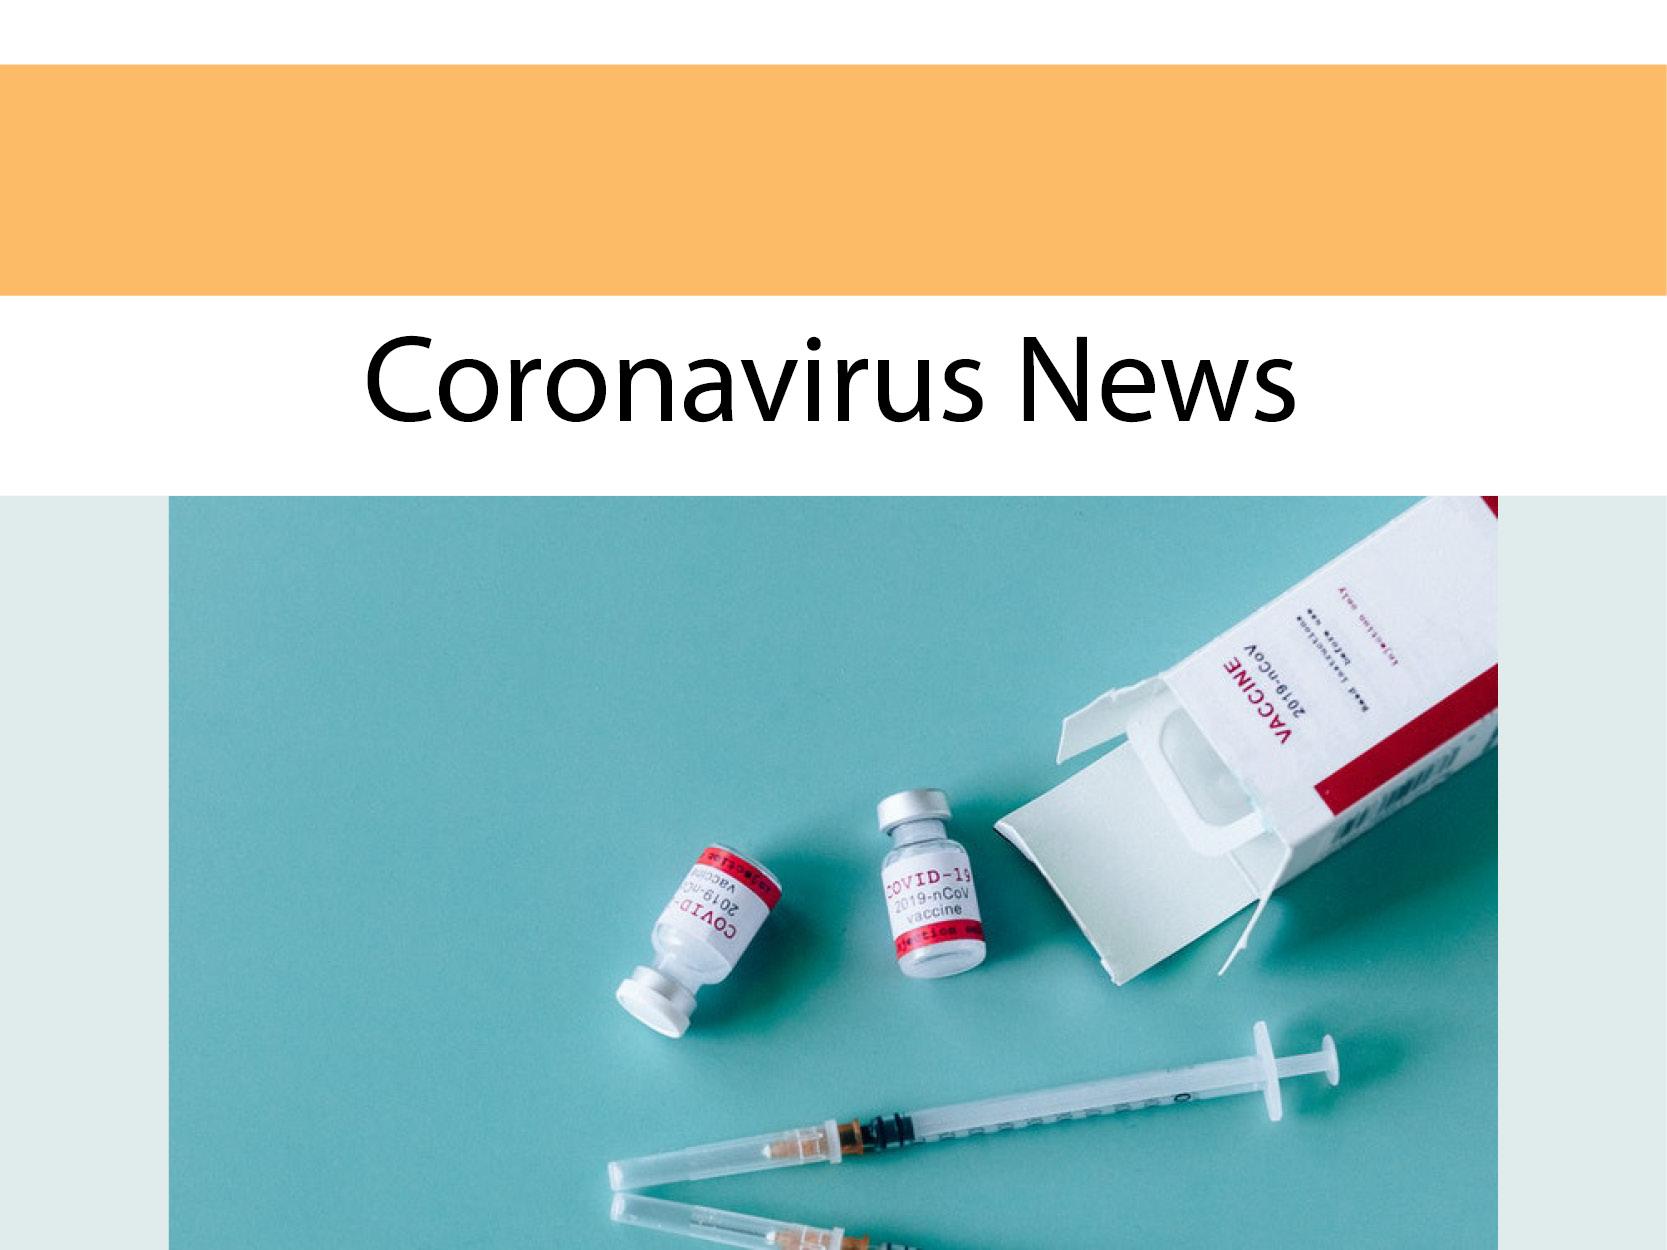 COVID-19 vaccination update from the Eastern Ontario Health Unit